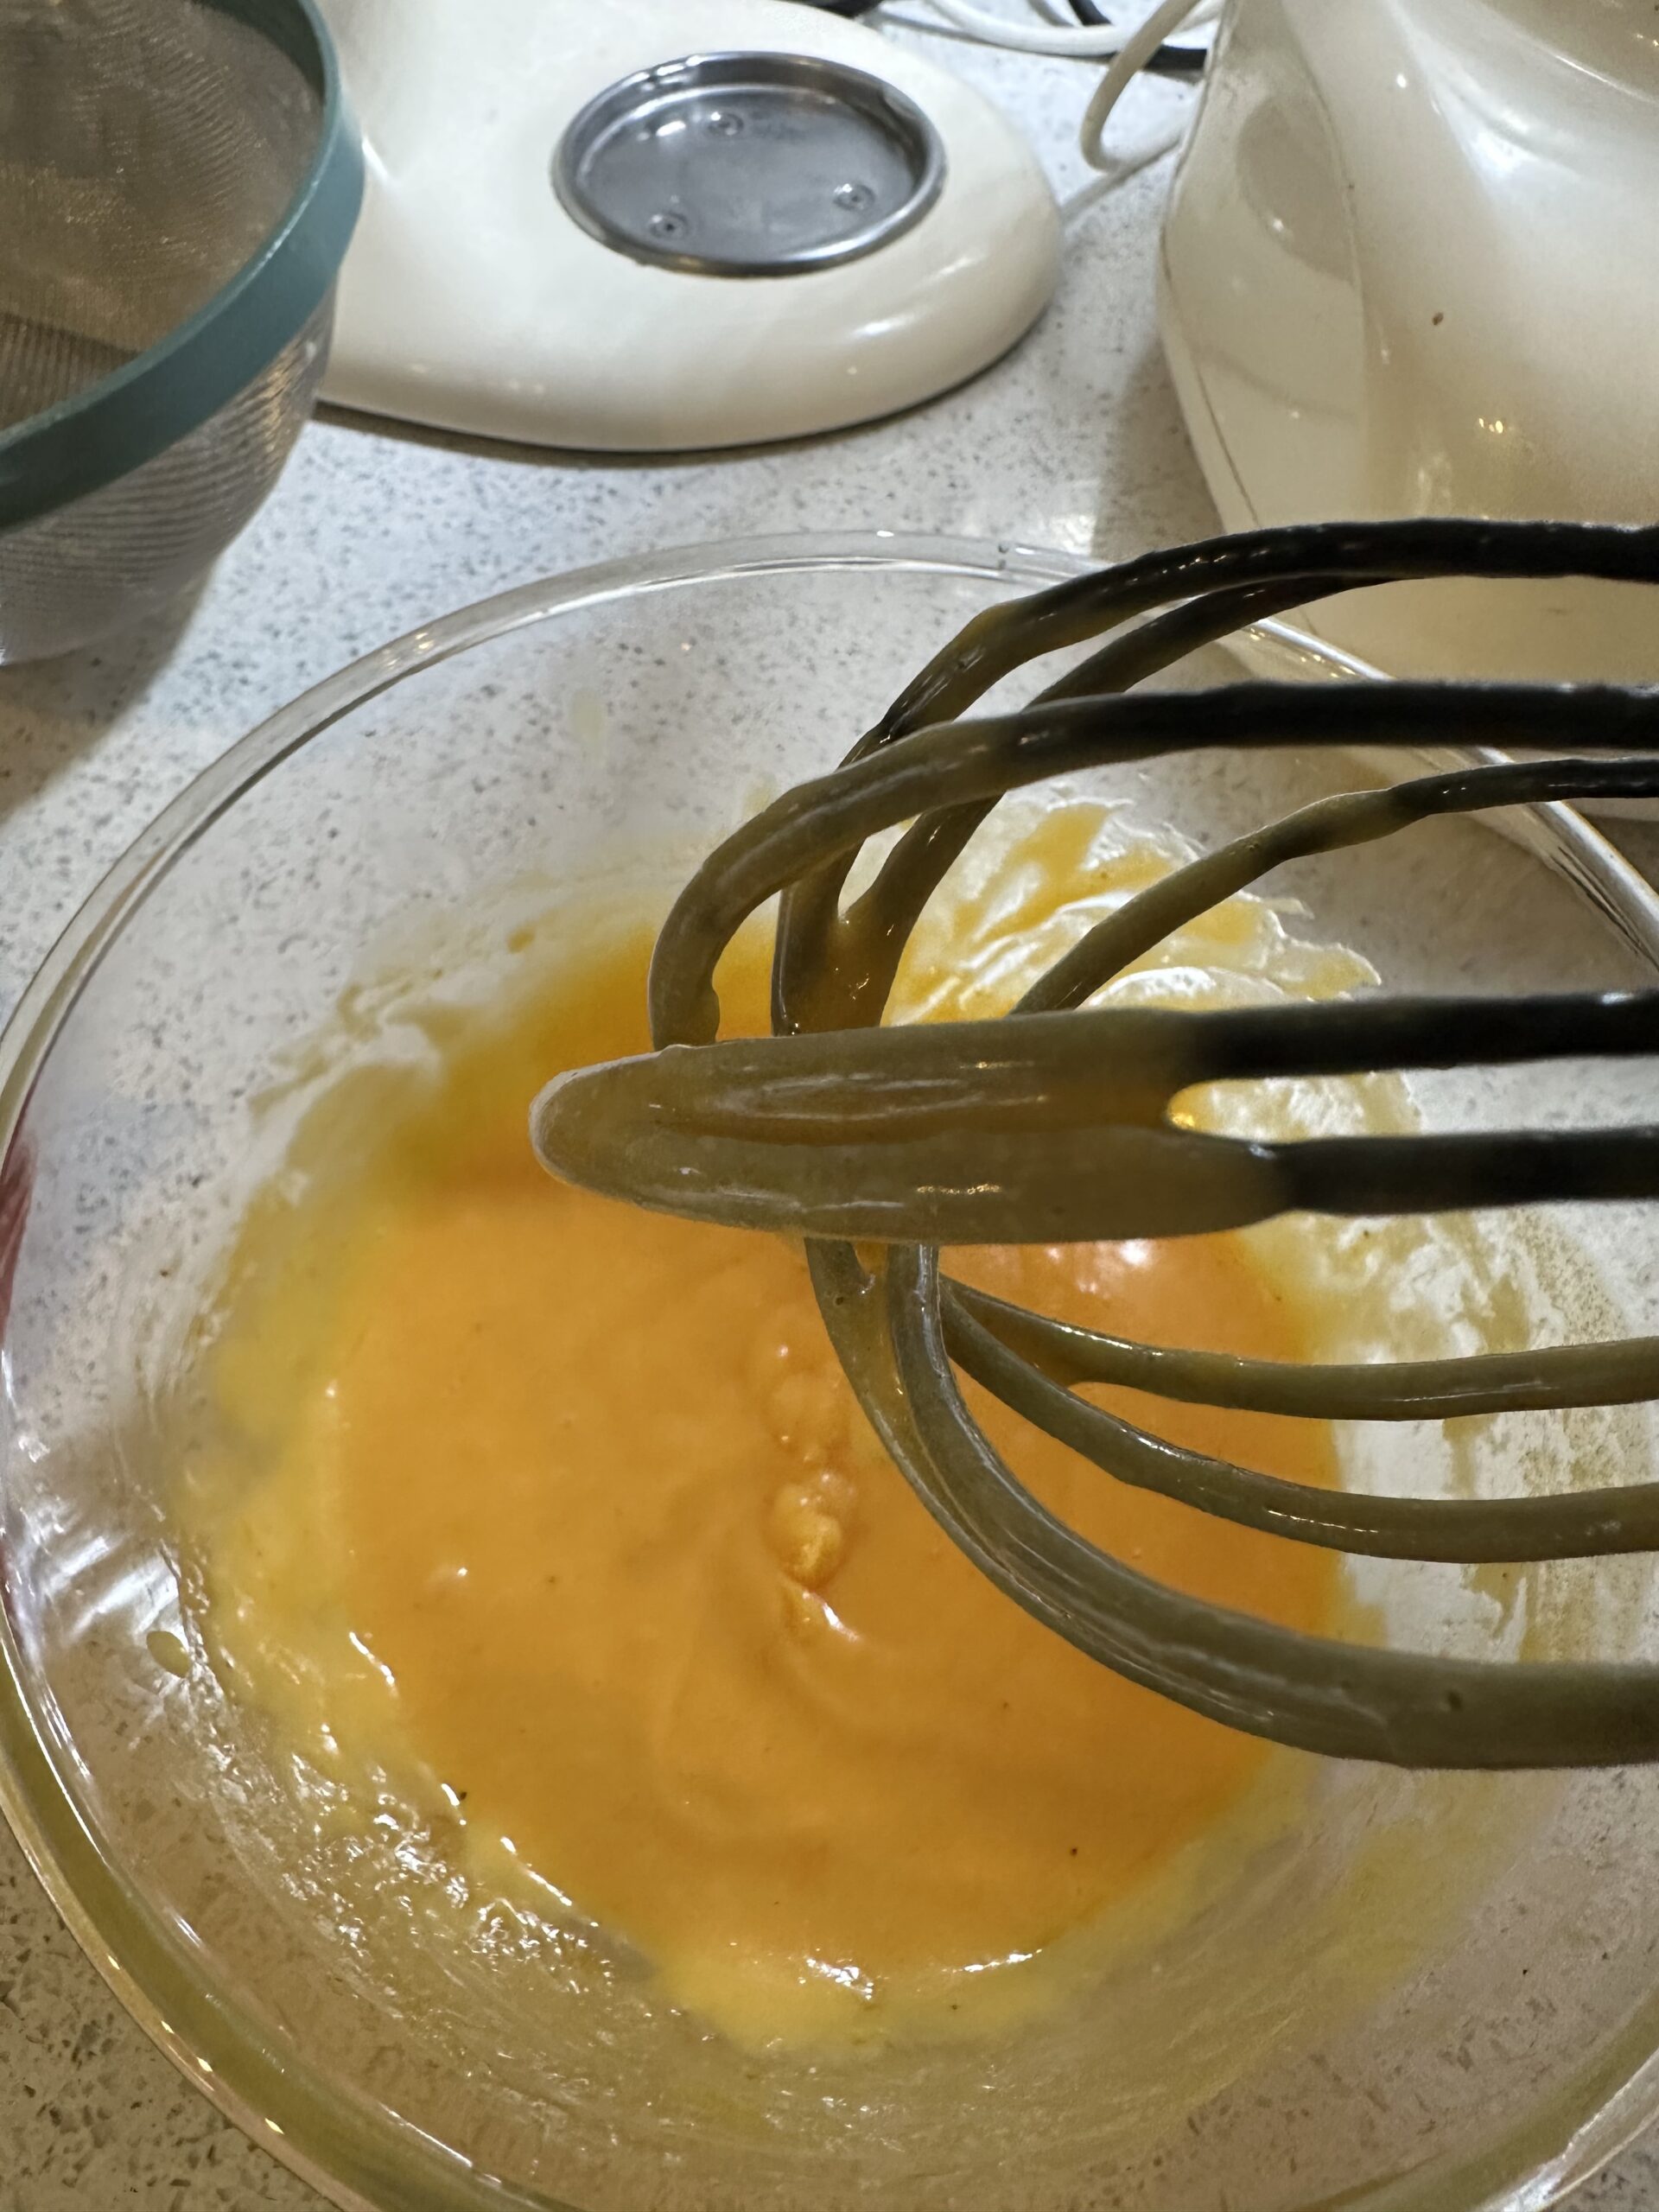 Bearnaise sauce when cooked